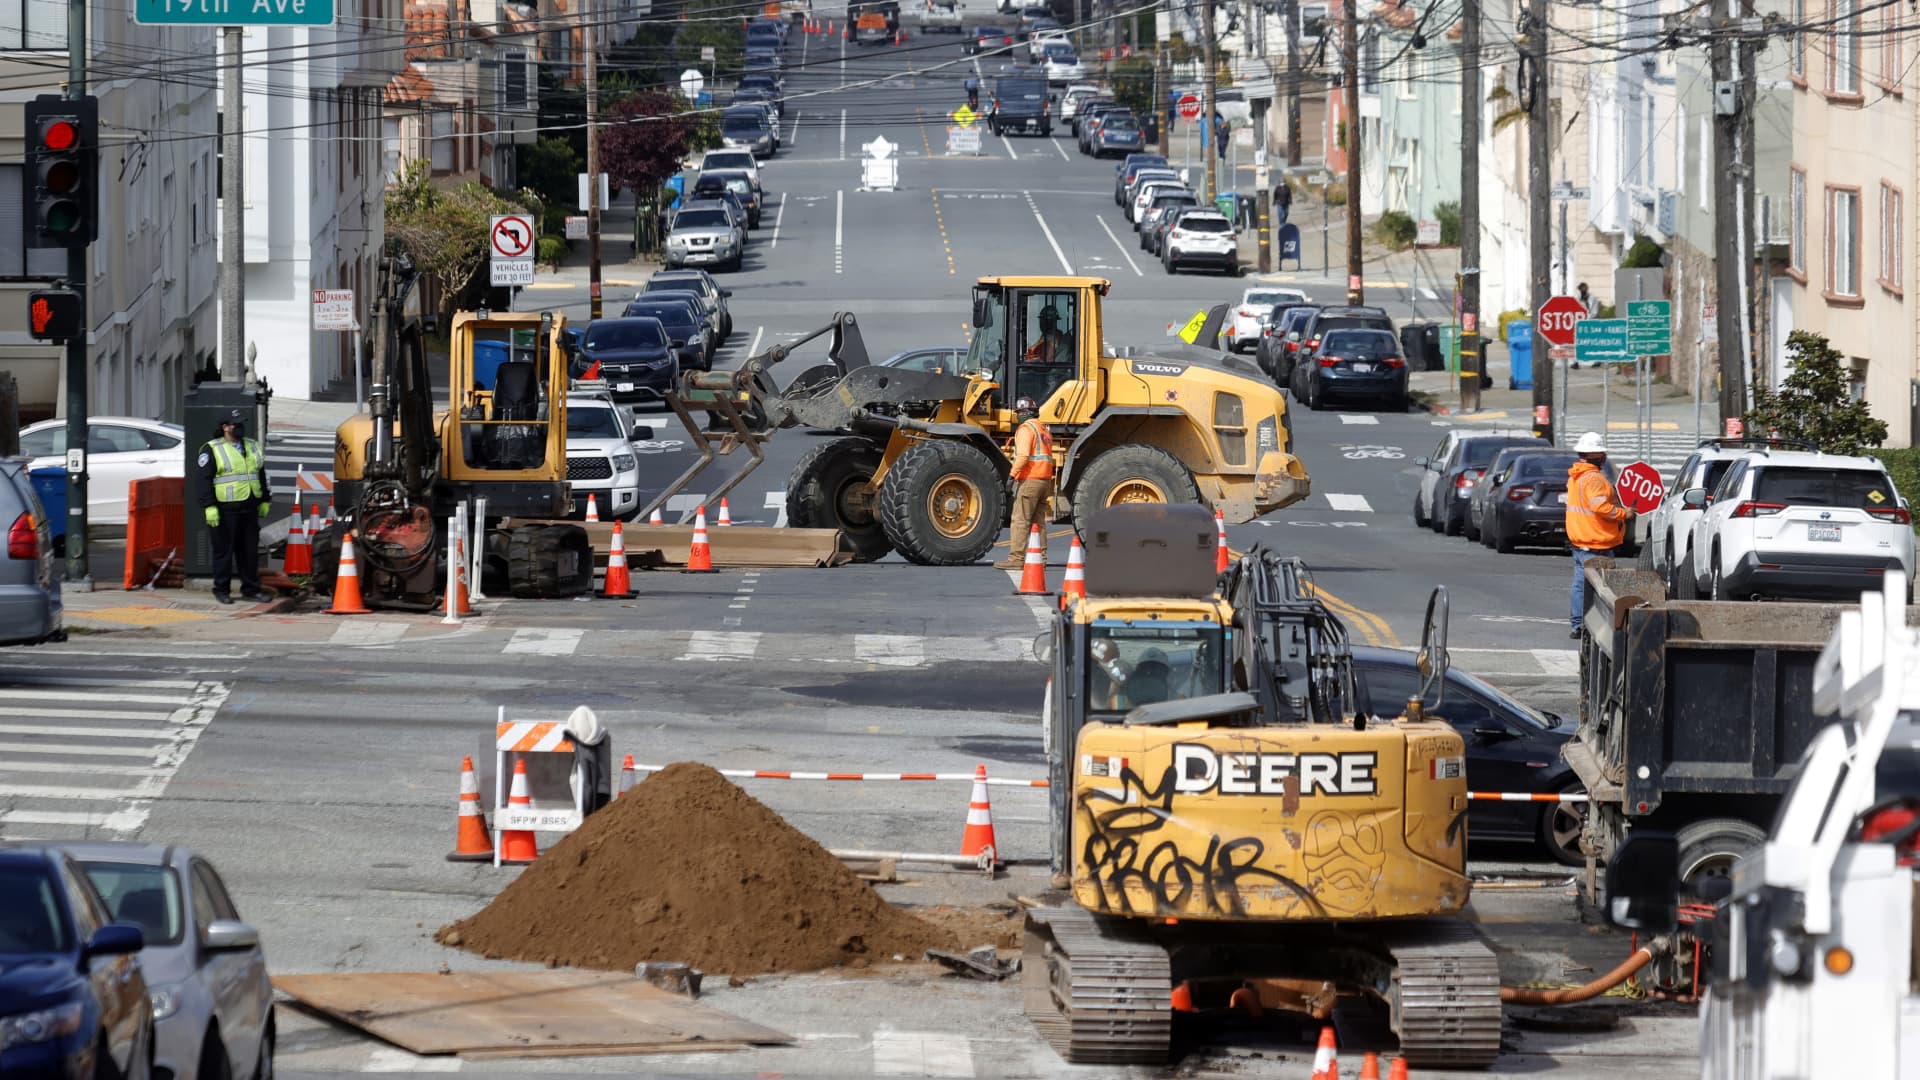 Workers operate a front loader as they make infrastructure repairs on April 07, 2021 in San Francisco, California.